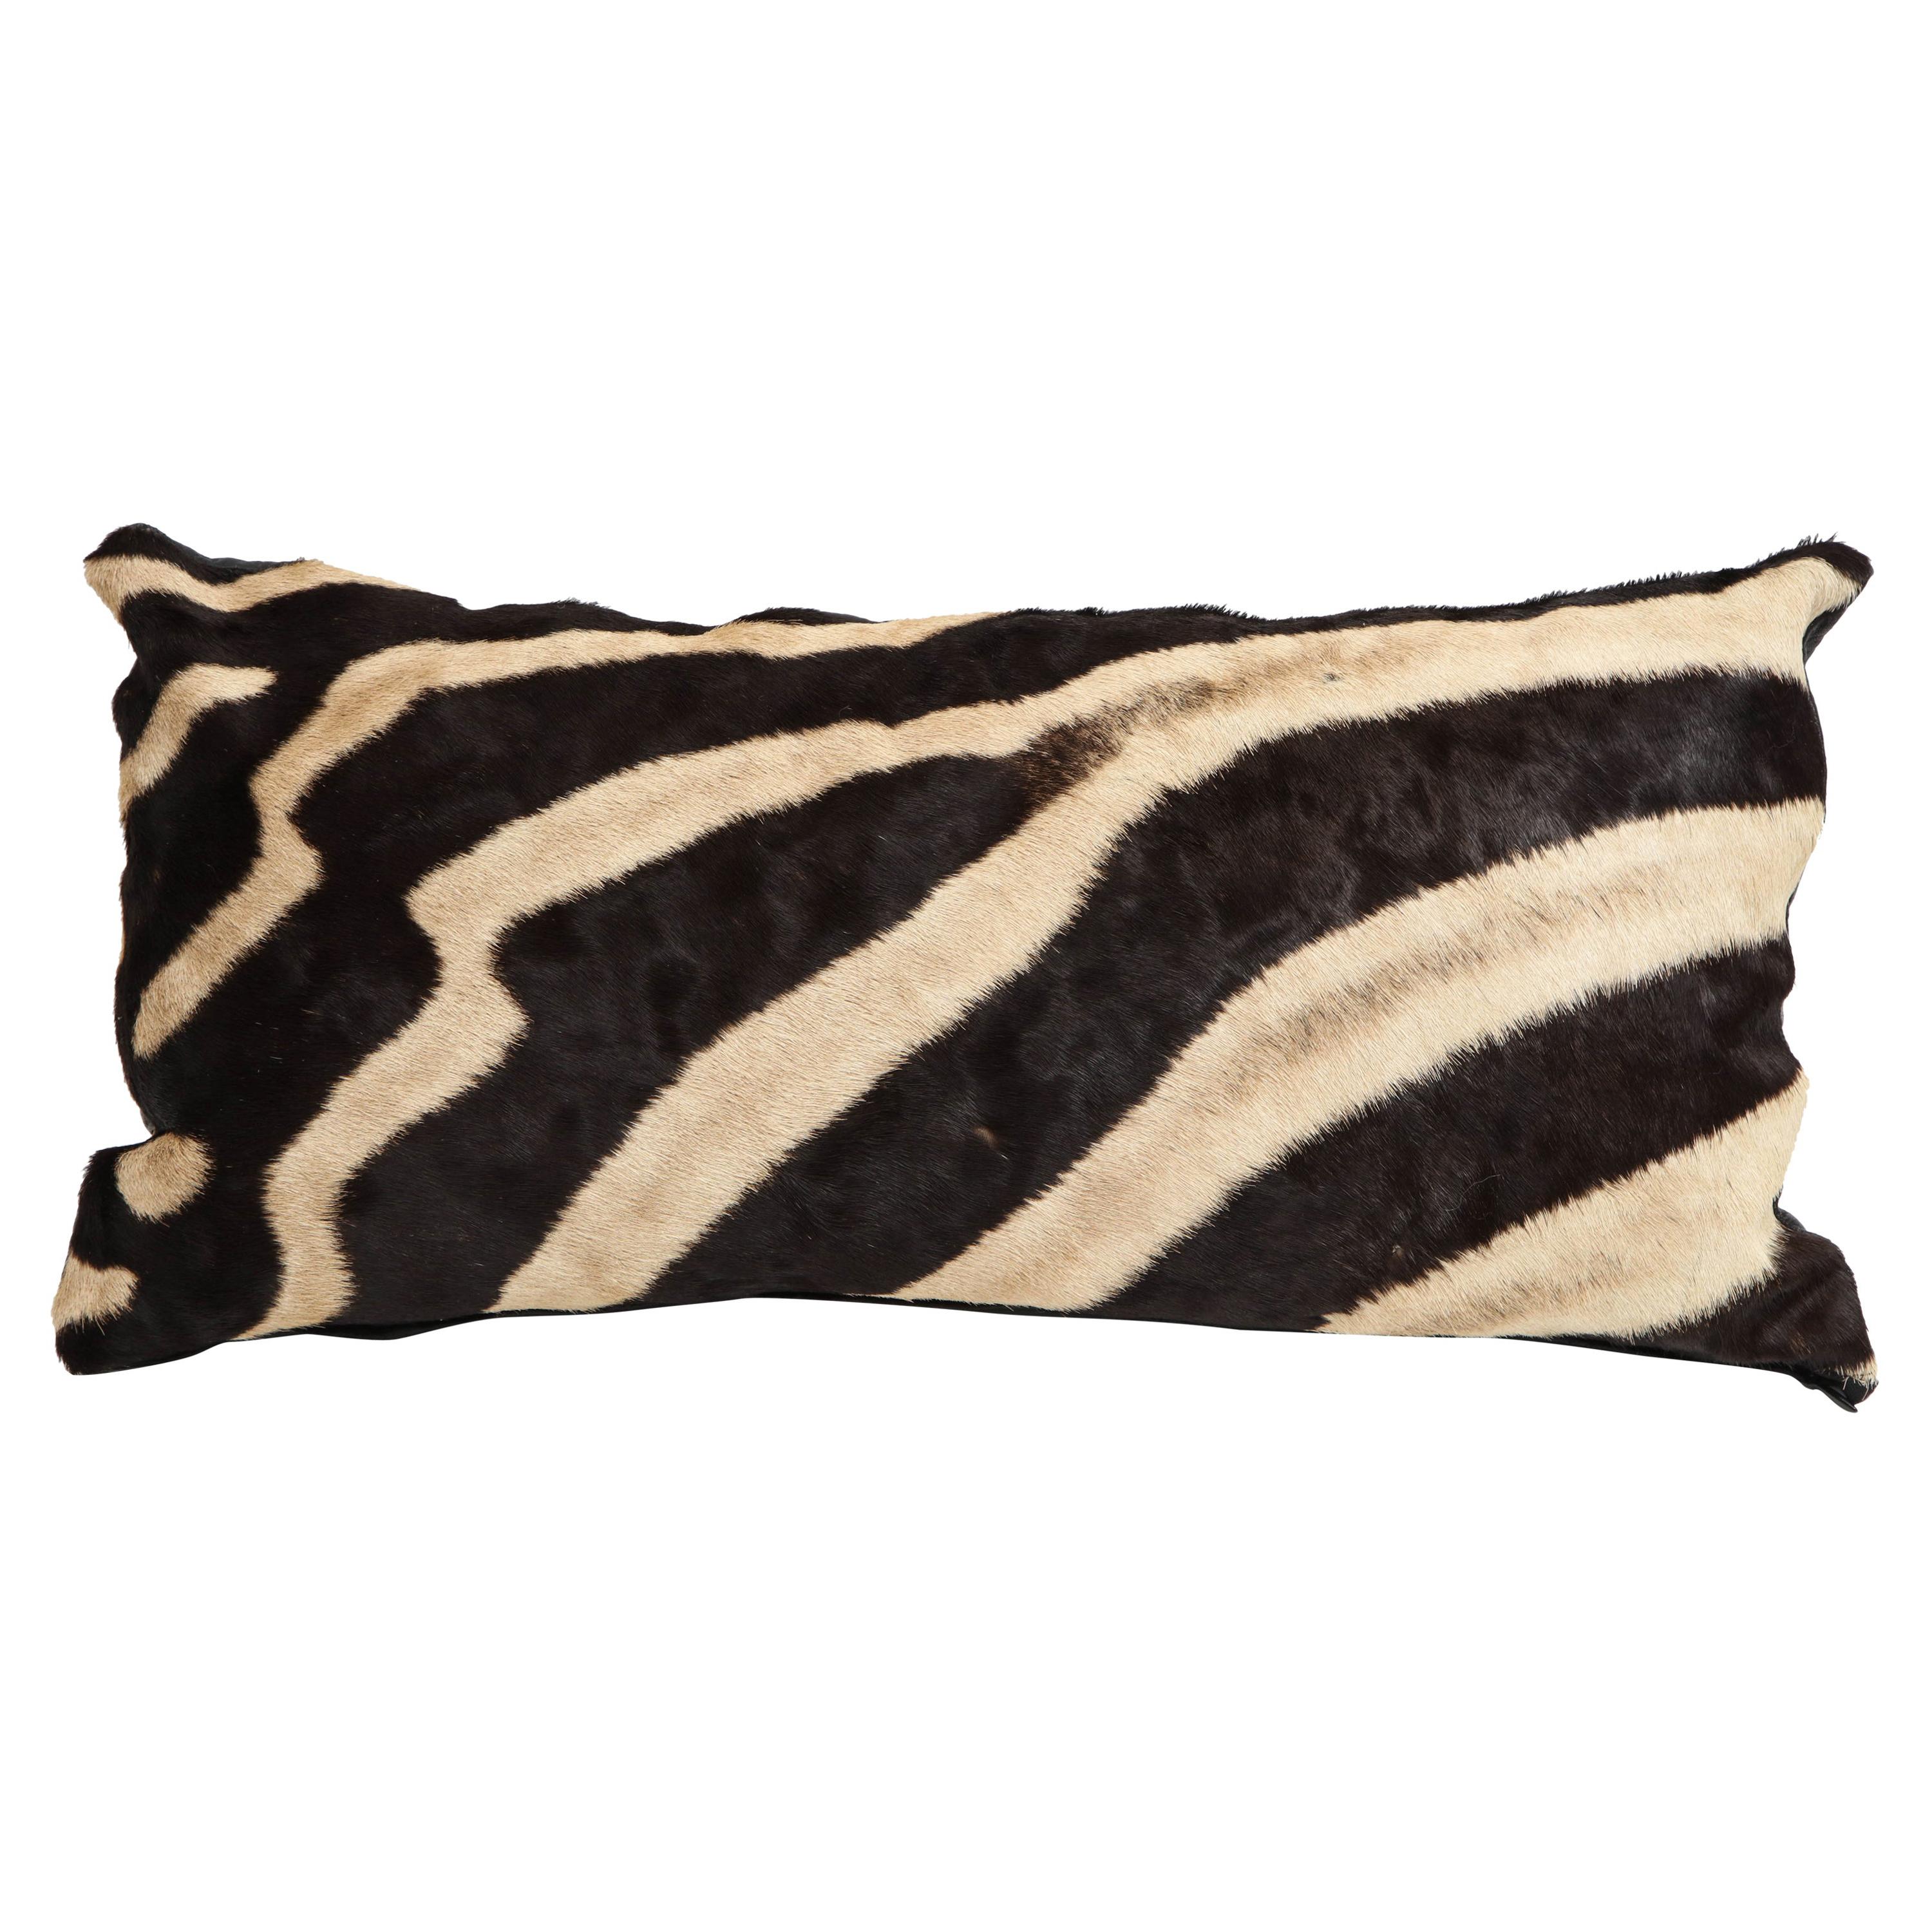 Pillow, Zebra Hide, Chocolate Brown Zebra Hide with Leather Backing, in Stock